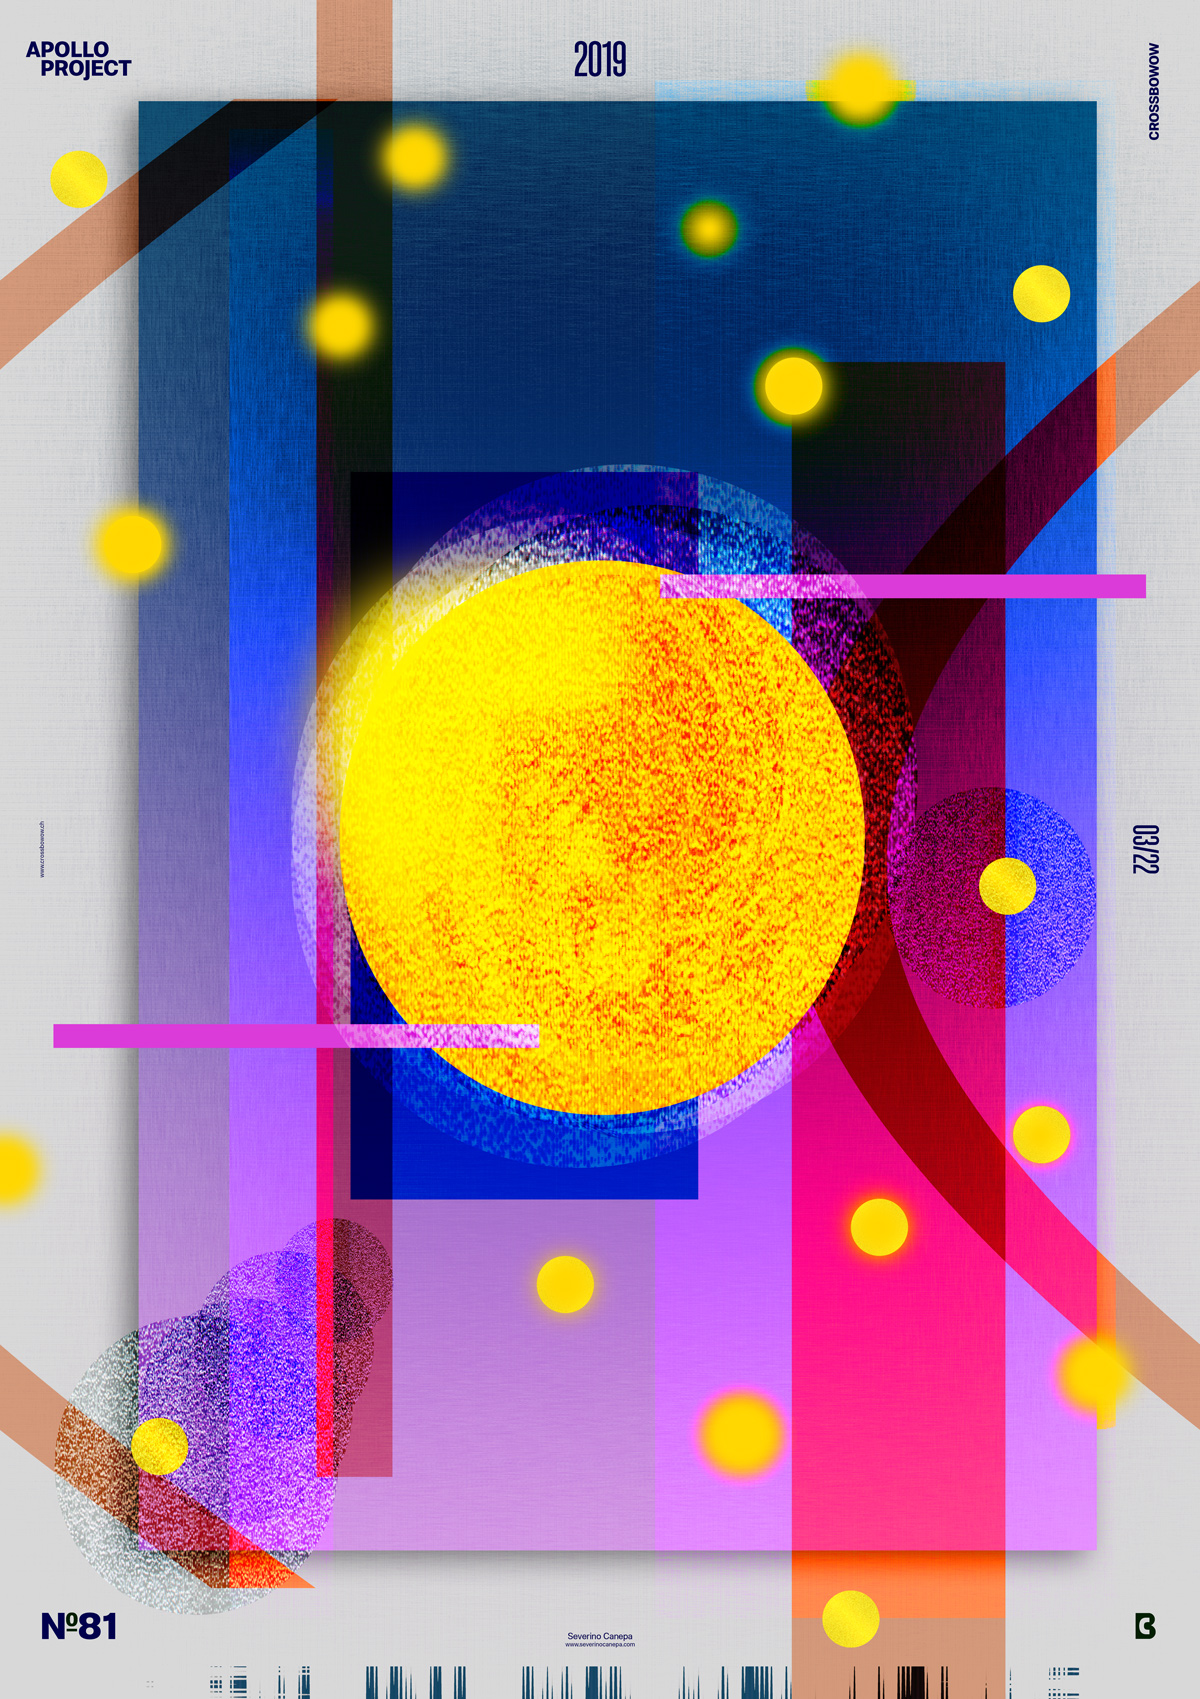 Visual of the poster design #81 titled Suns and its geometric shapes